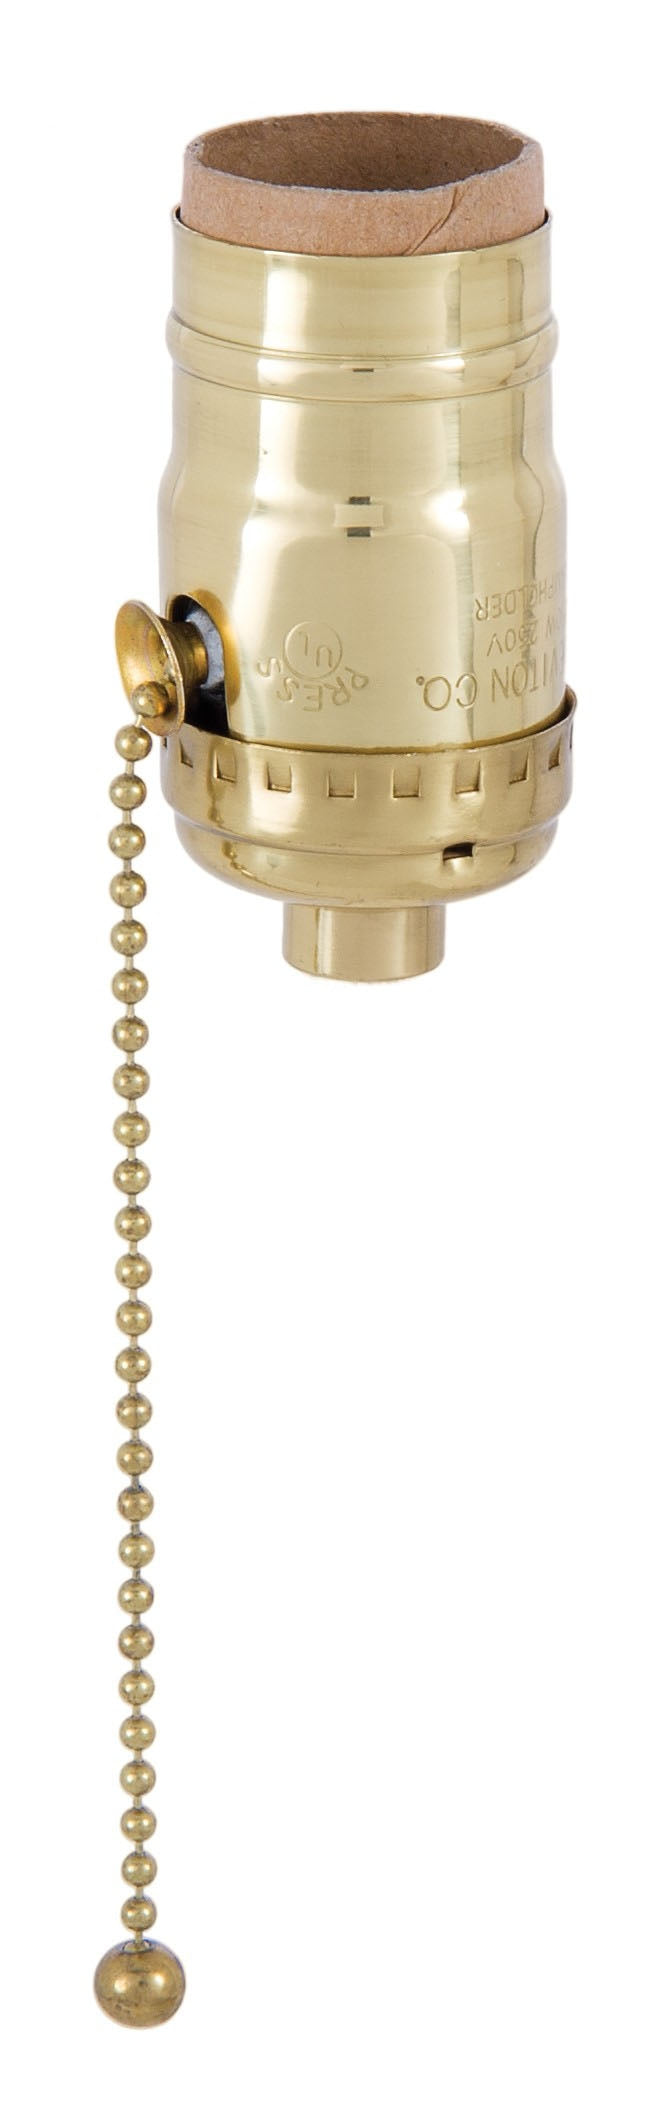 On/Off Pull Chain Lamp Socket (LEVITON), Brass, Polished & Lacquered Shell - NO SET SCREW